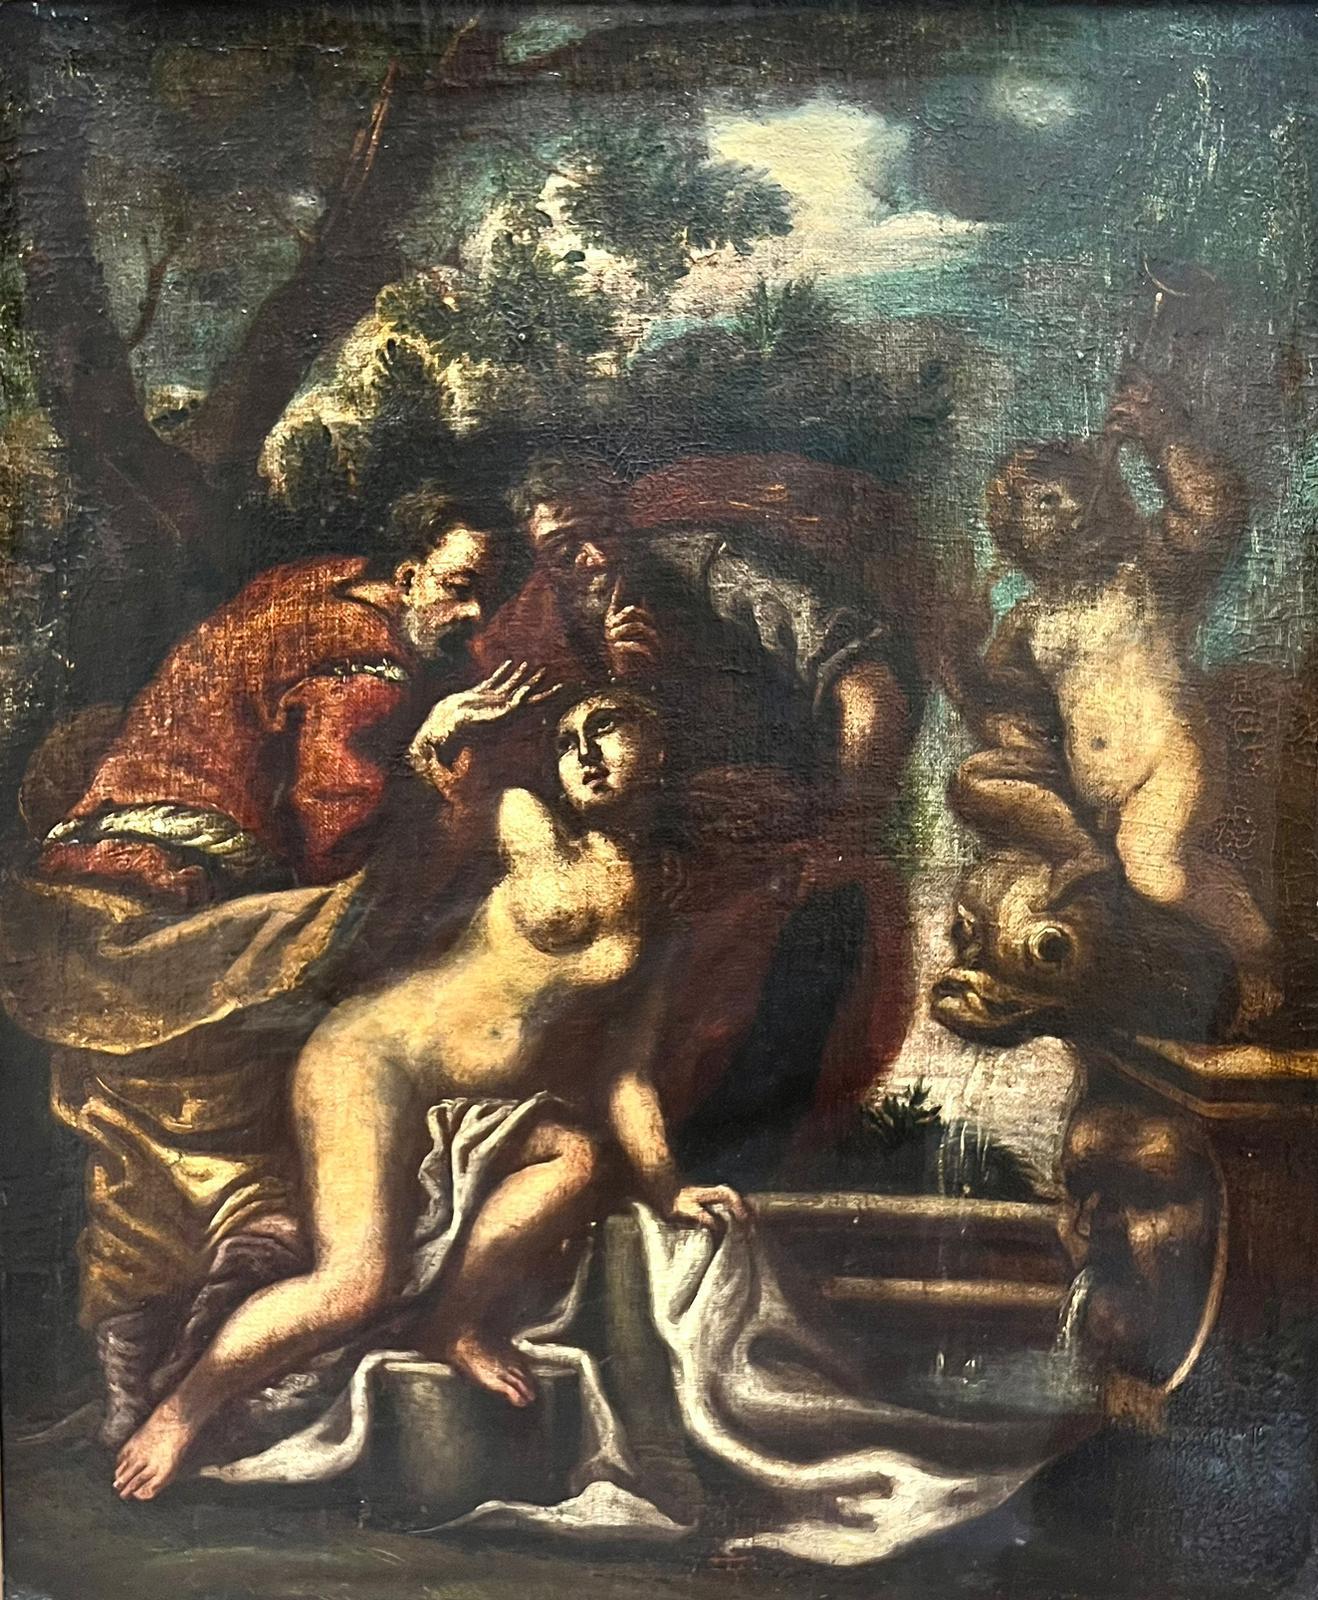 18th Century Italian Old Master Figurative Painting - Large 1700 Italian Old Master Nude Bather with Classical Figures Water Fountain 